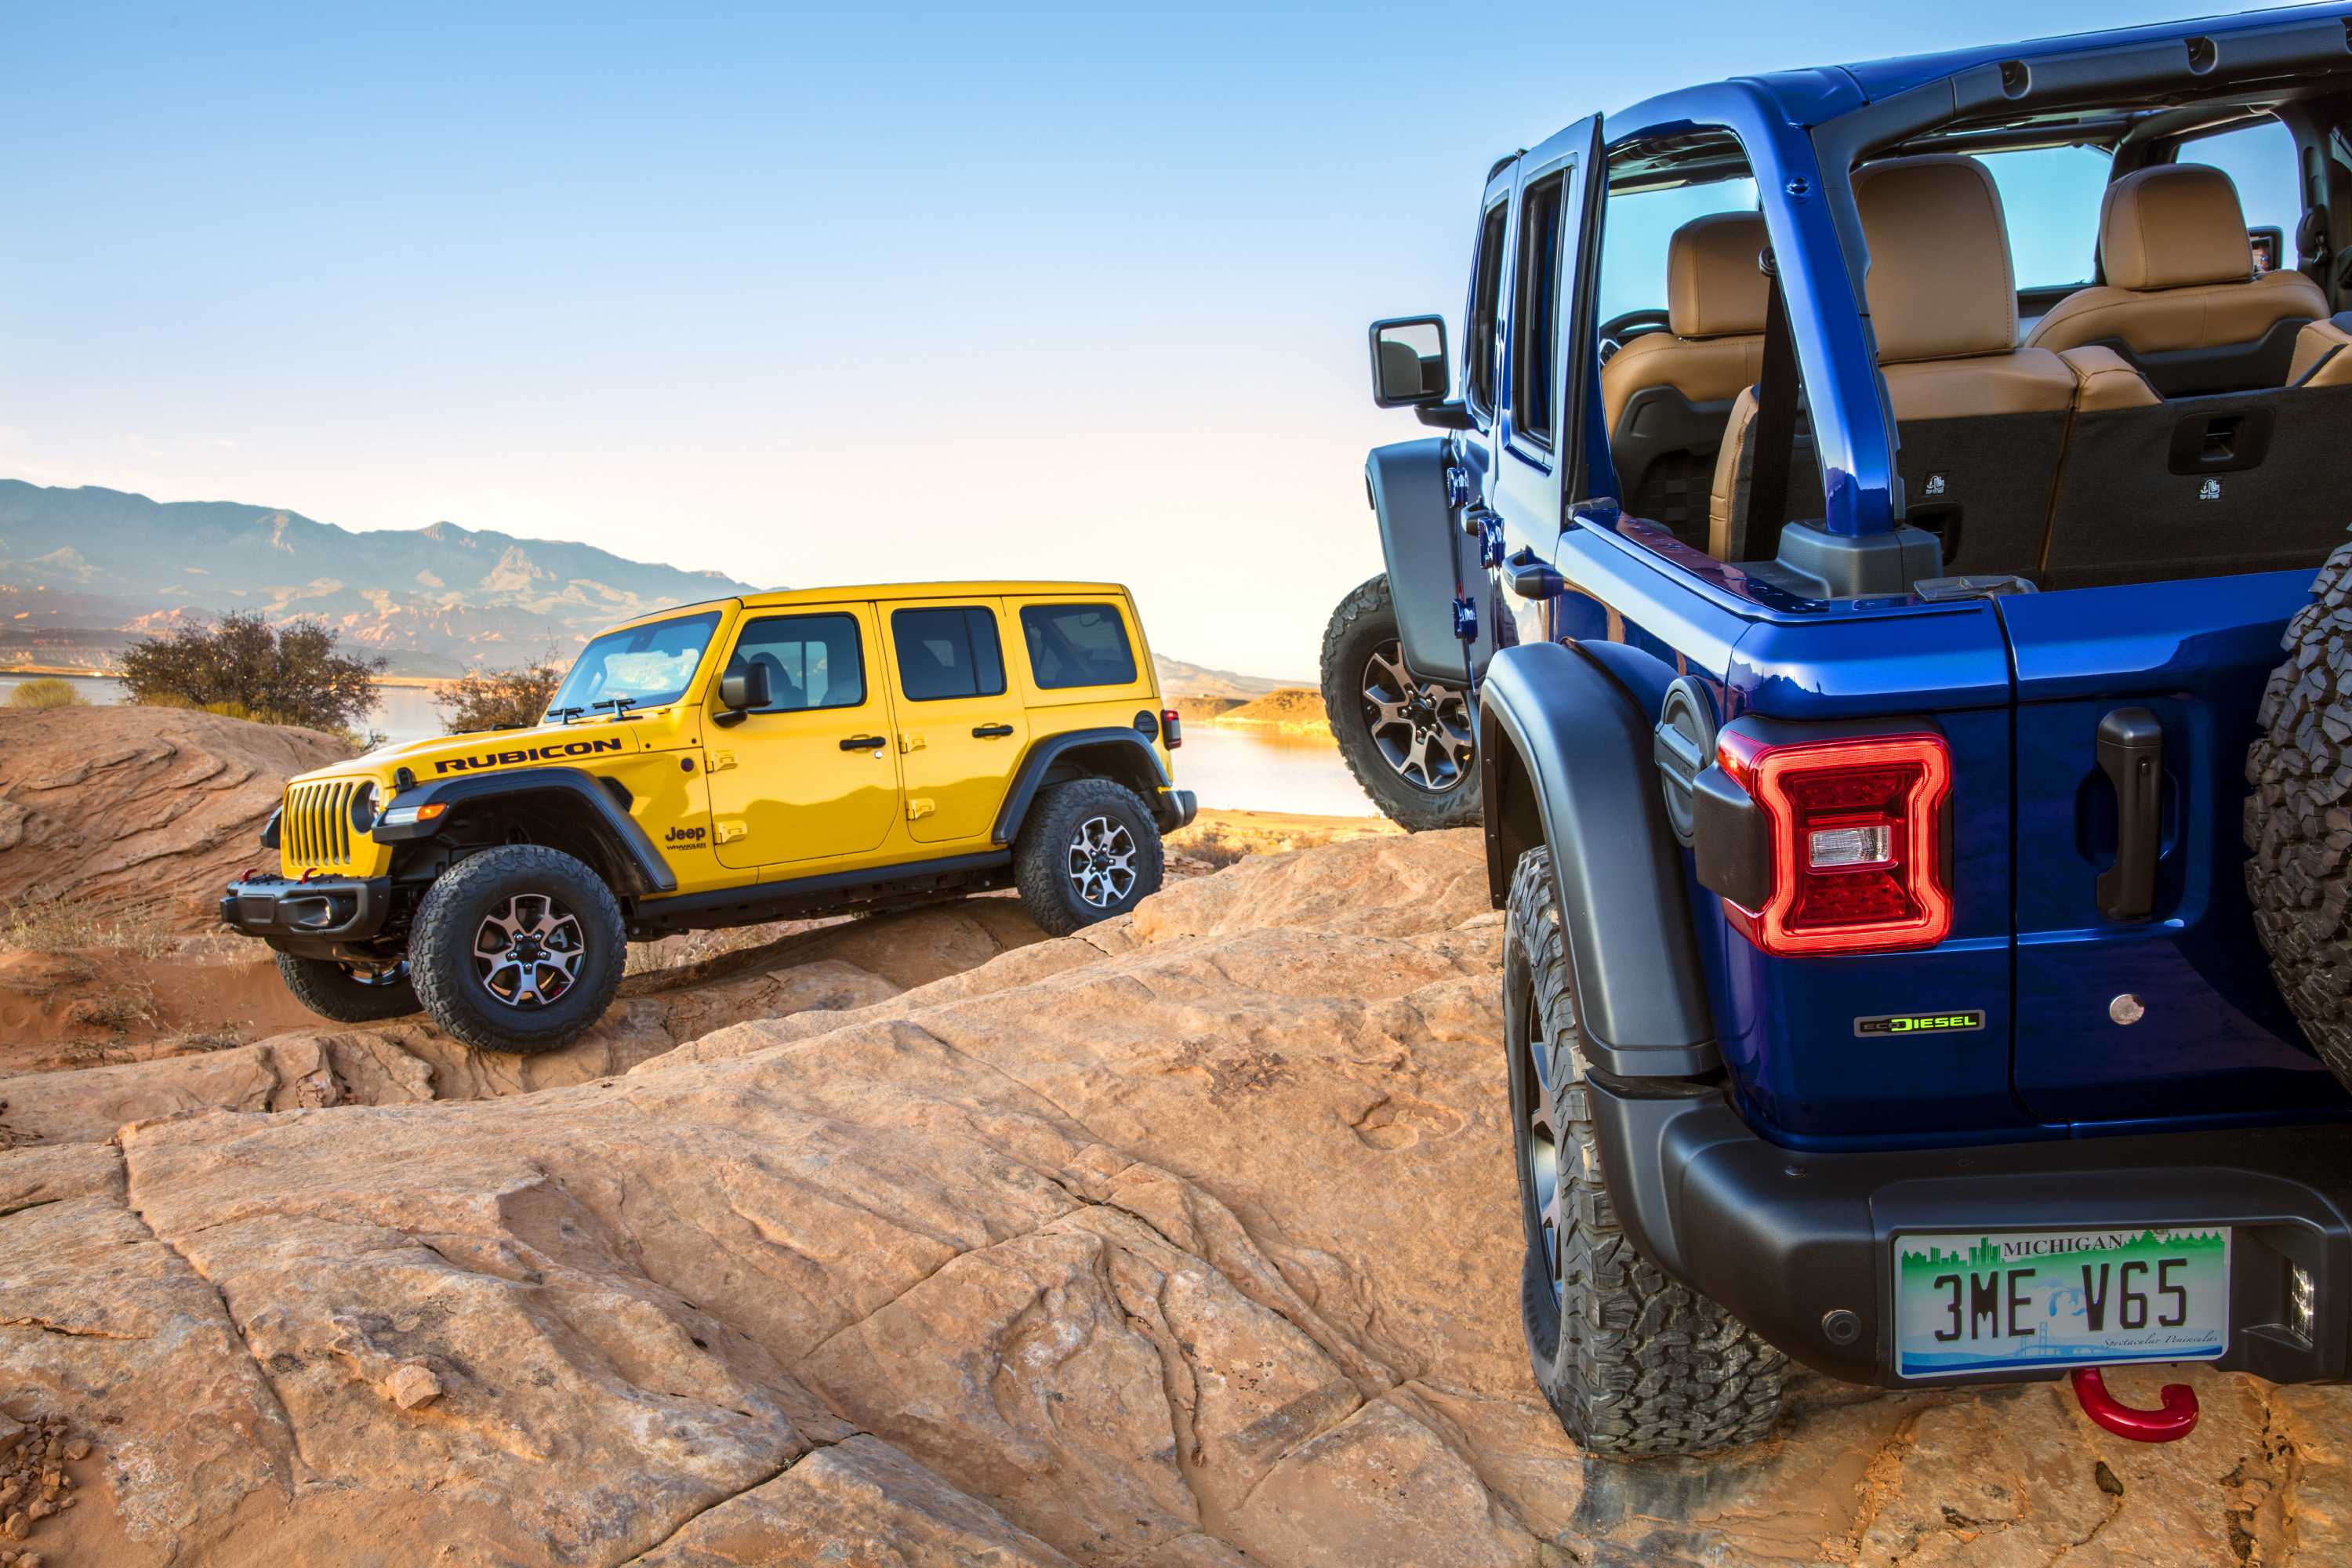 Jeep Wrangler | Here's what's great about diesel engine